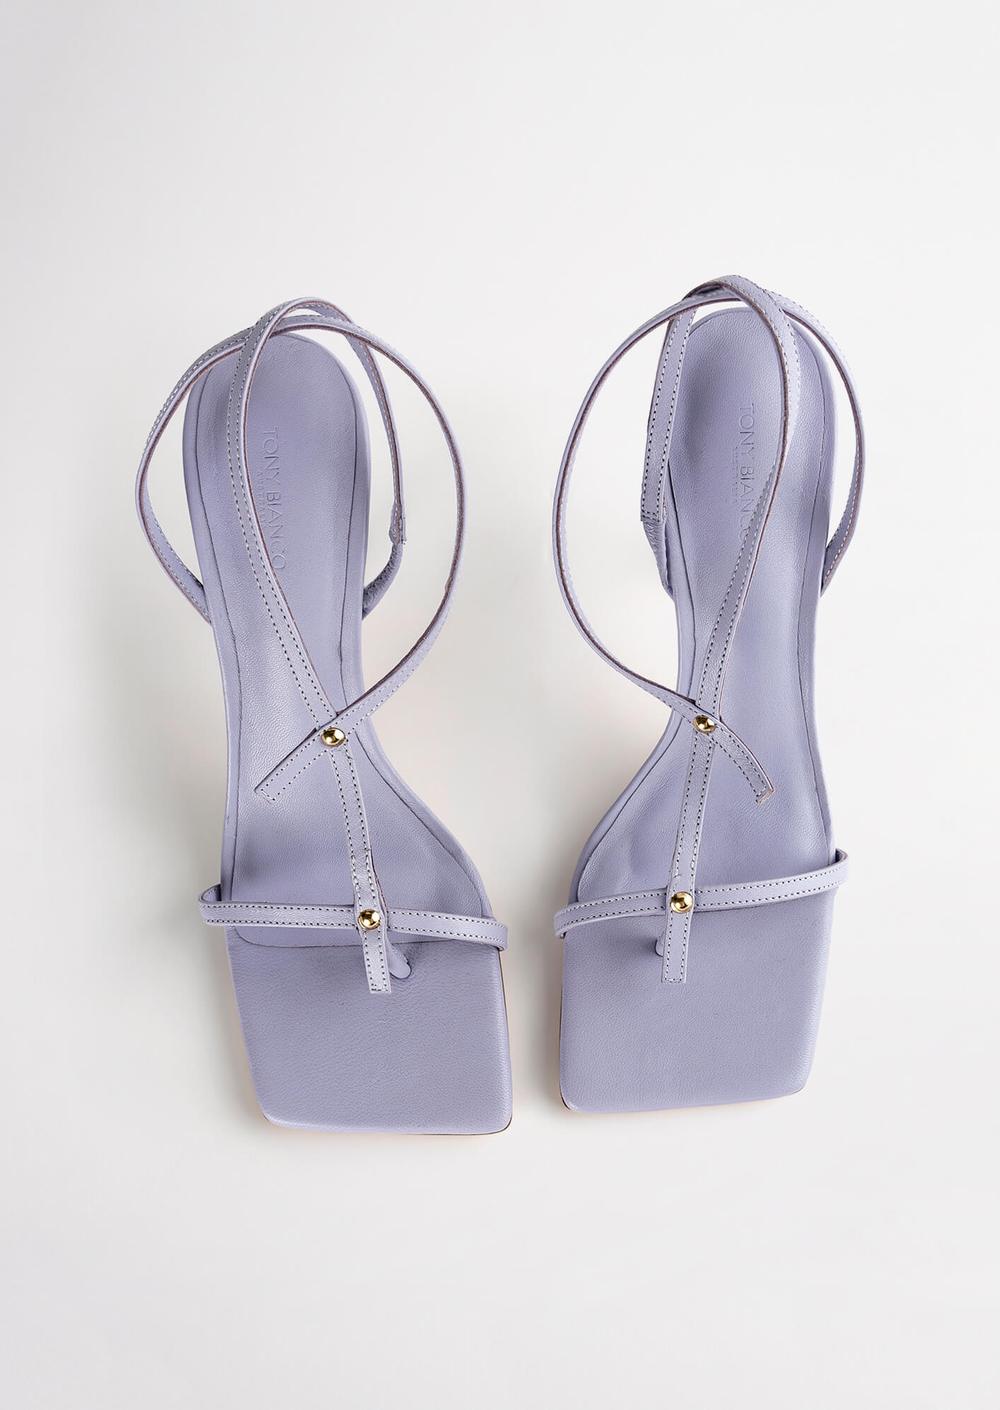 LILLY STRAPPY HEEL - TONY BIANCO - 10, 5, 6, 6.5, 7, 7.5, 8, 8.5, 9, 9.5, lilac, musk, on sale, stiletto, stiletto heel, STRAPPY HEEL, womens footwear - Stomp Shoes Darwin